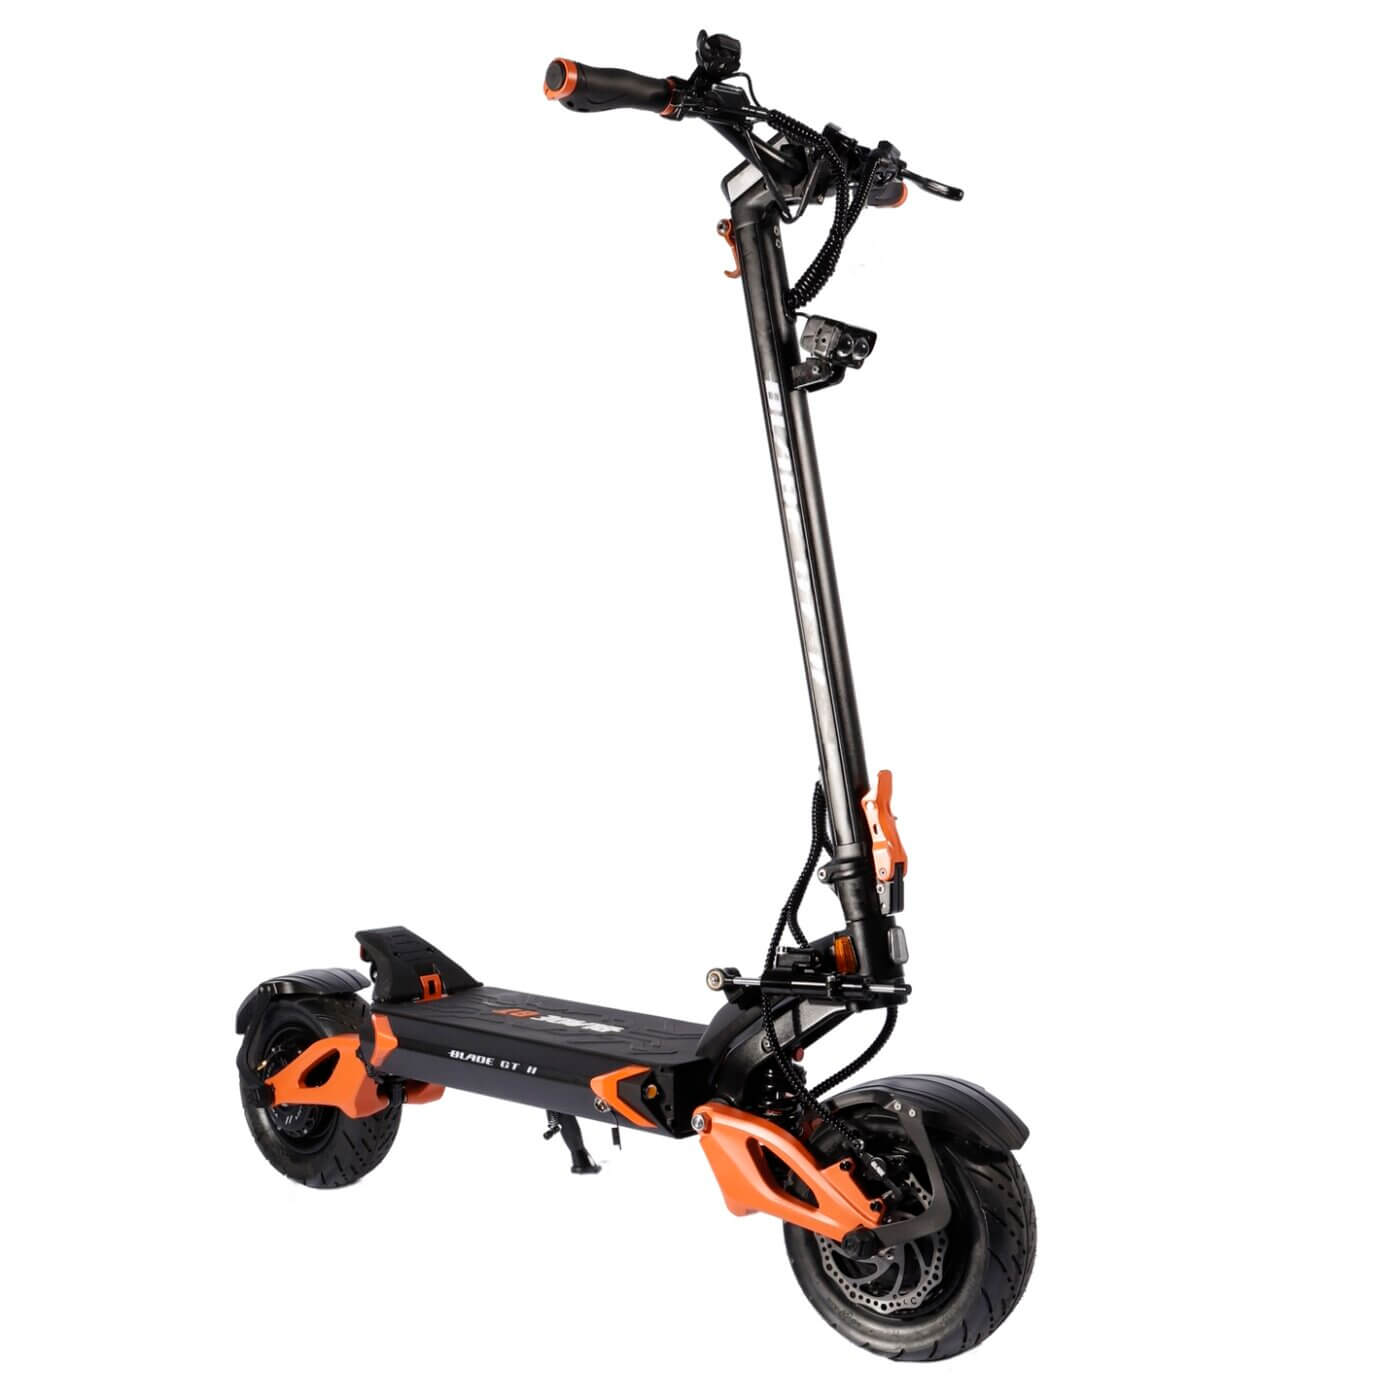 An electric scooter, Blade GT II, on a white background.